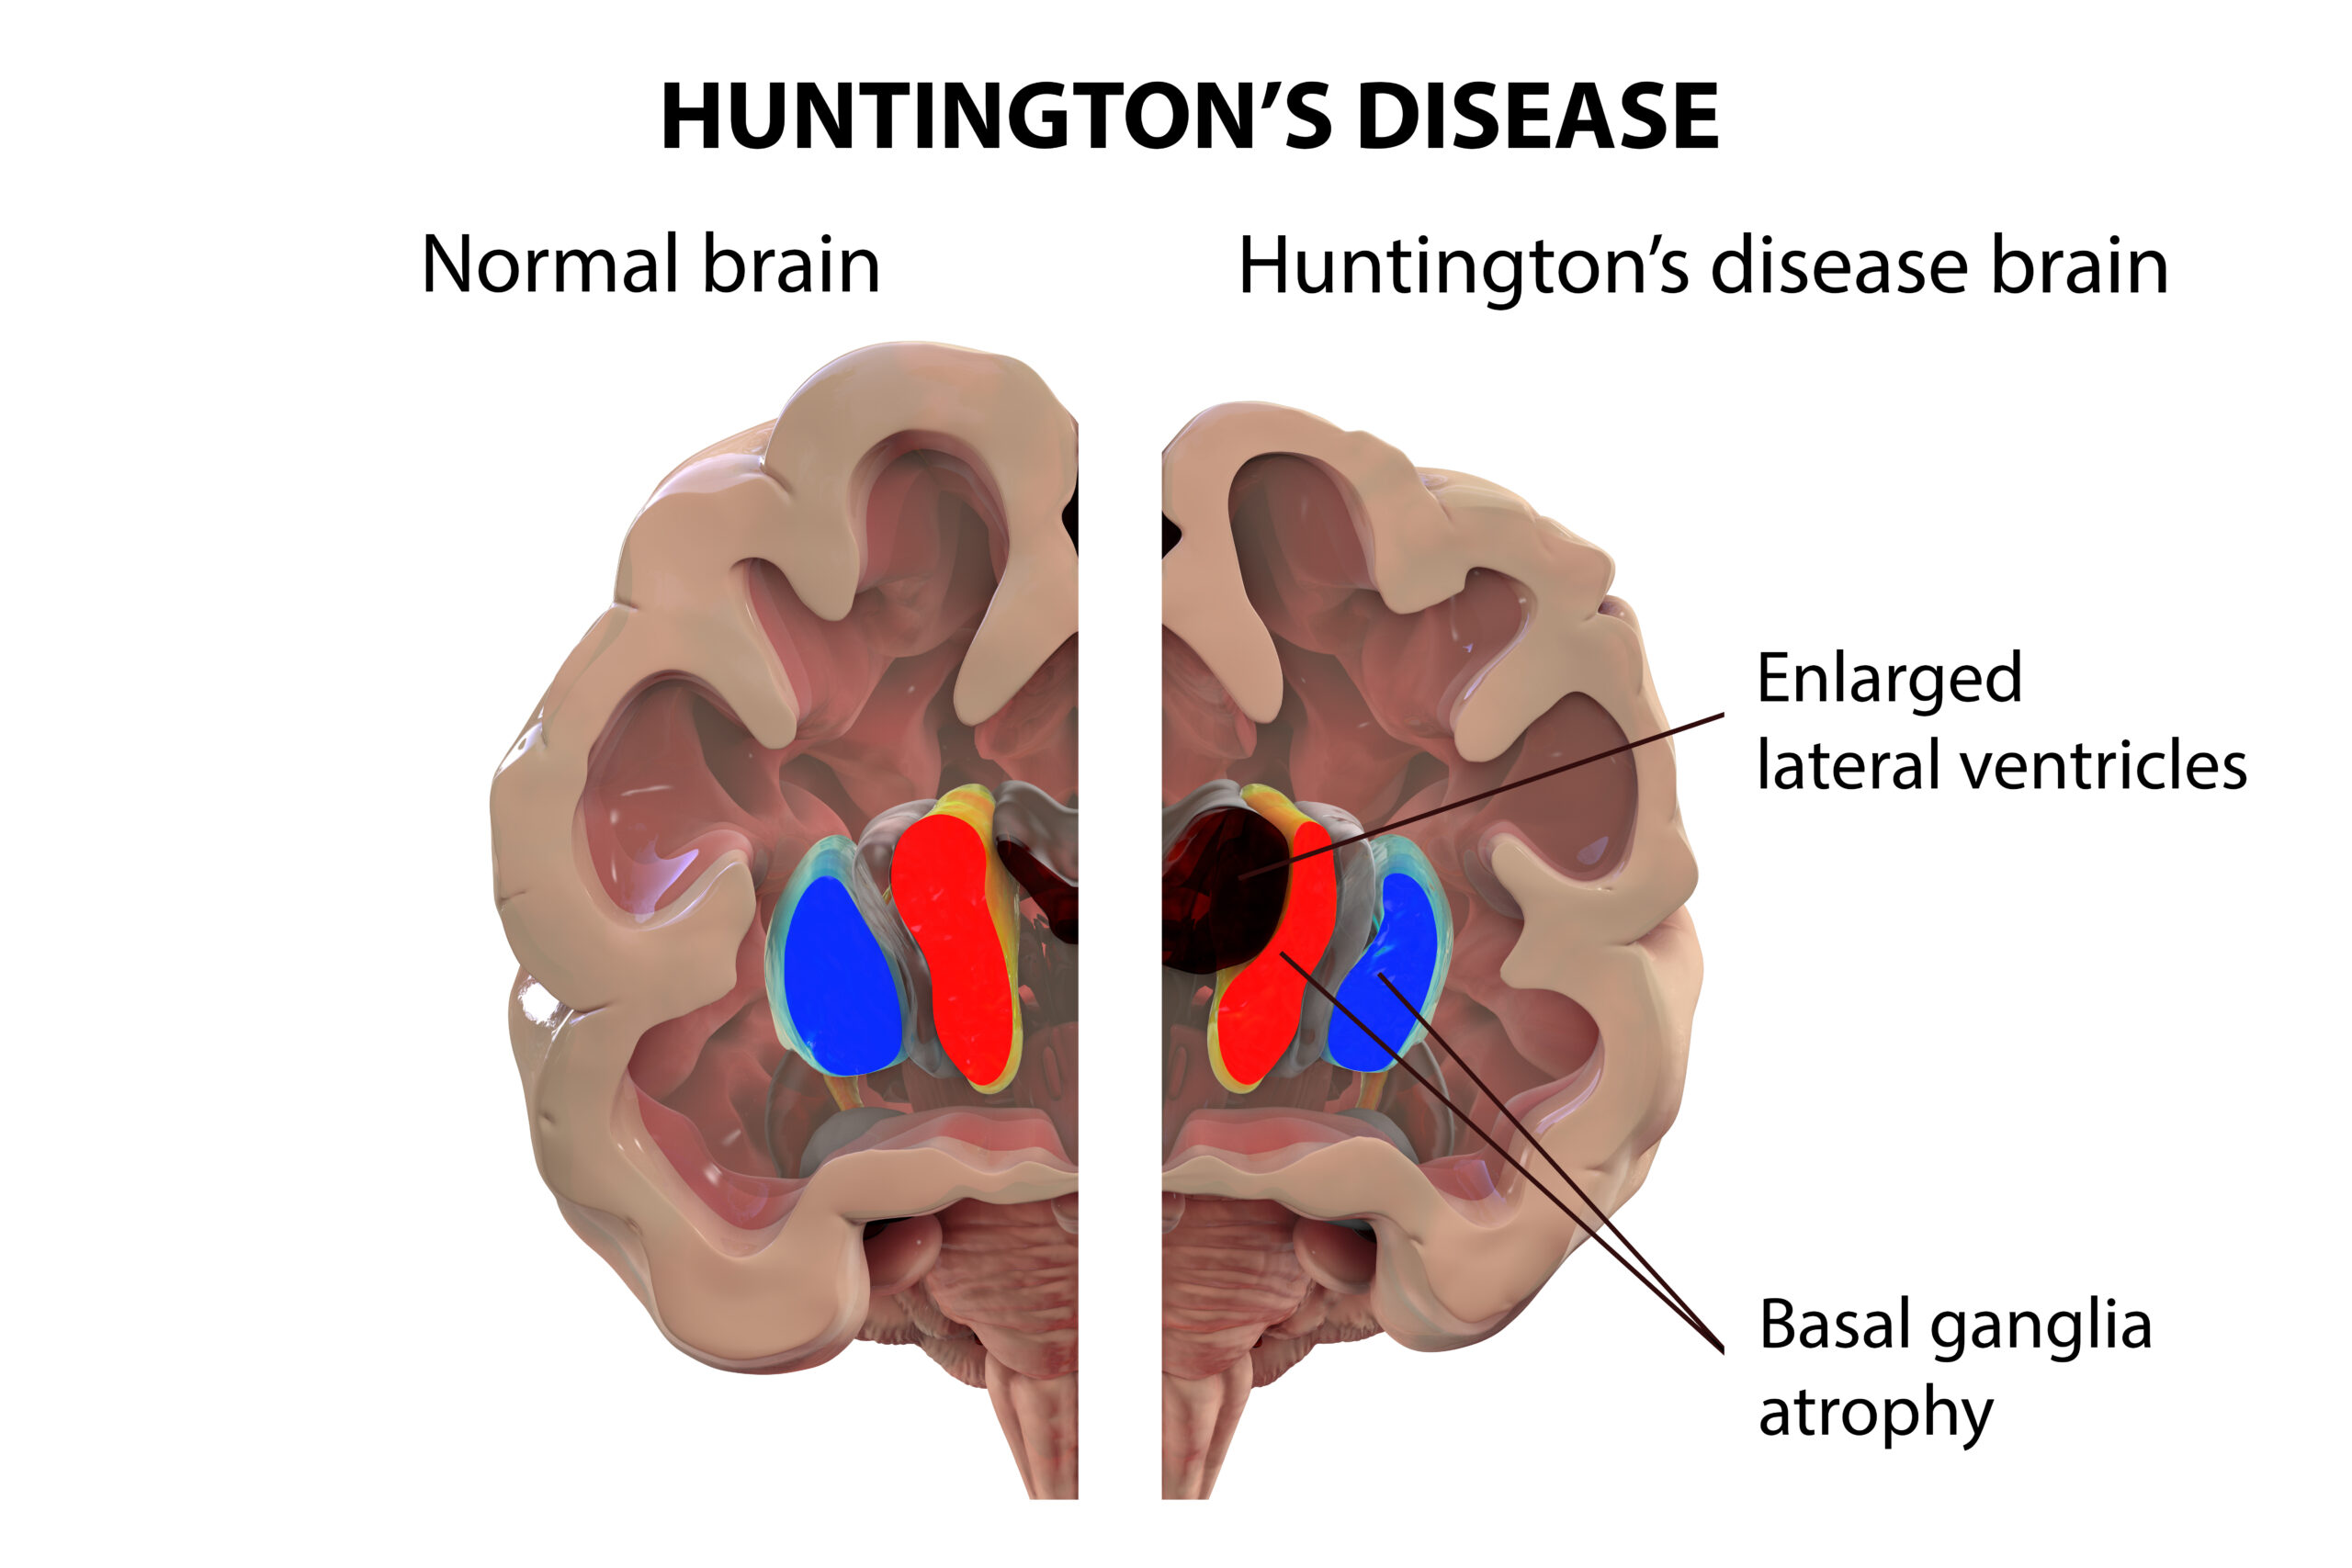 Illustration comparing normal brain to brain with Huntington's disease. 